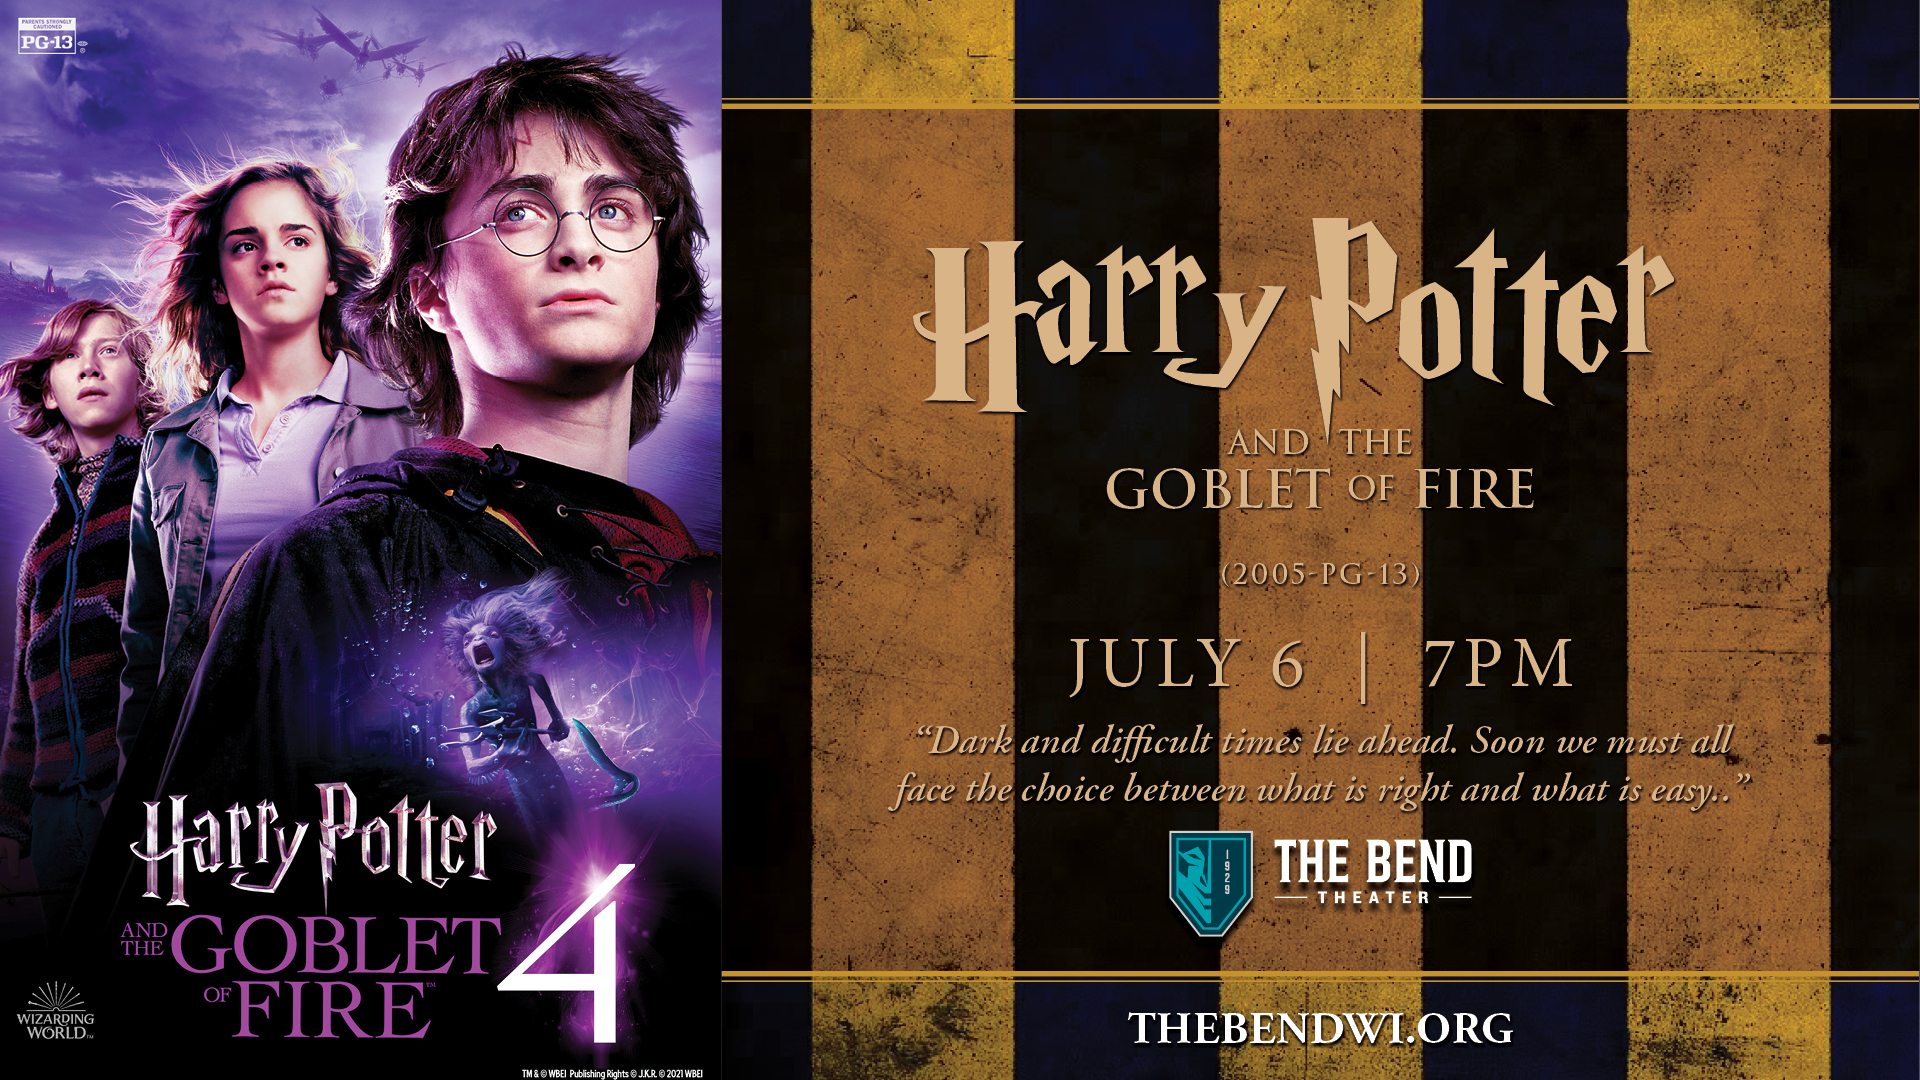 The Bend Theater presents Harry Potter and The Goblet of Fire